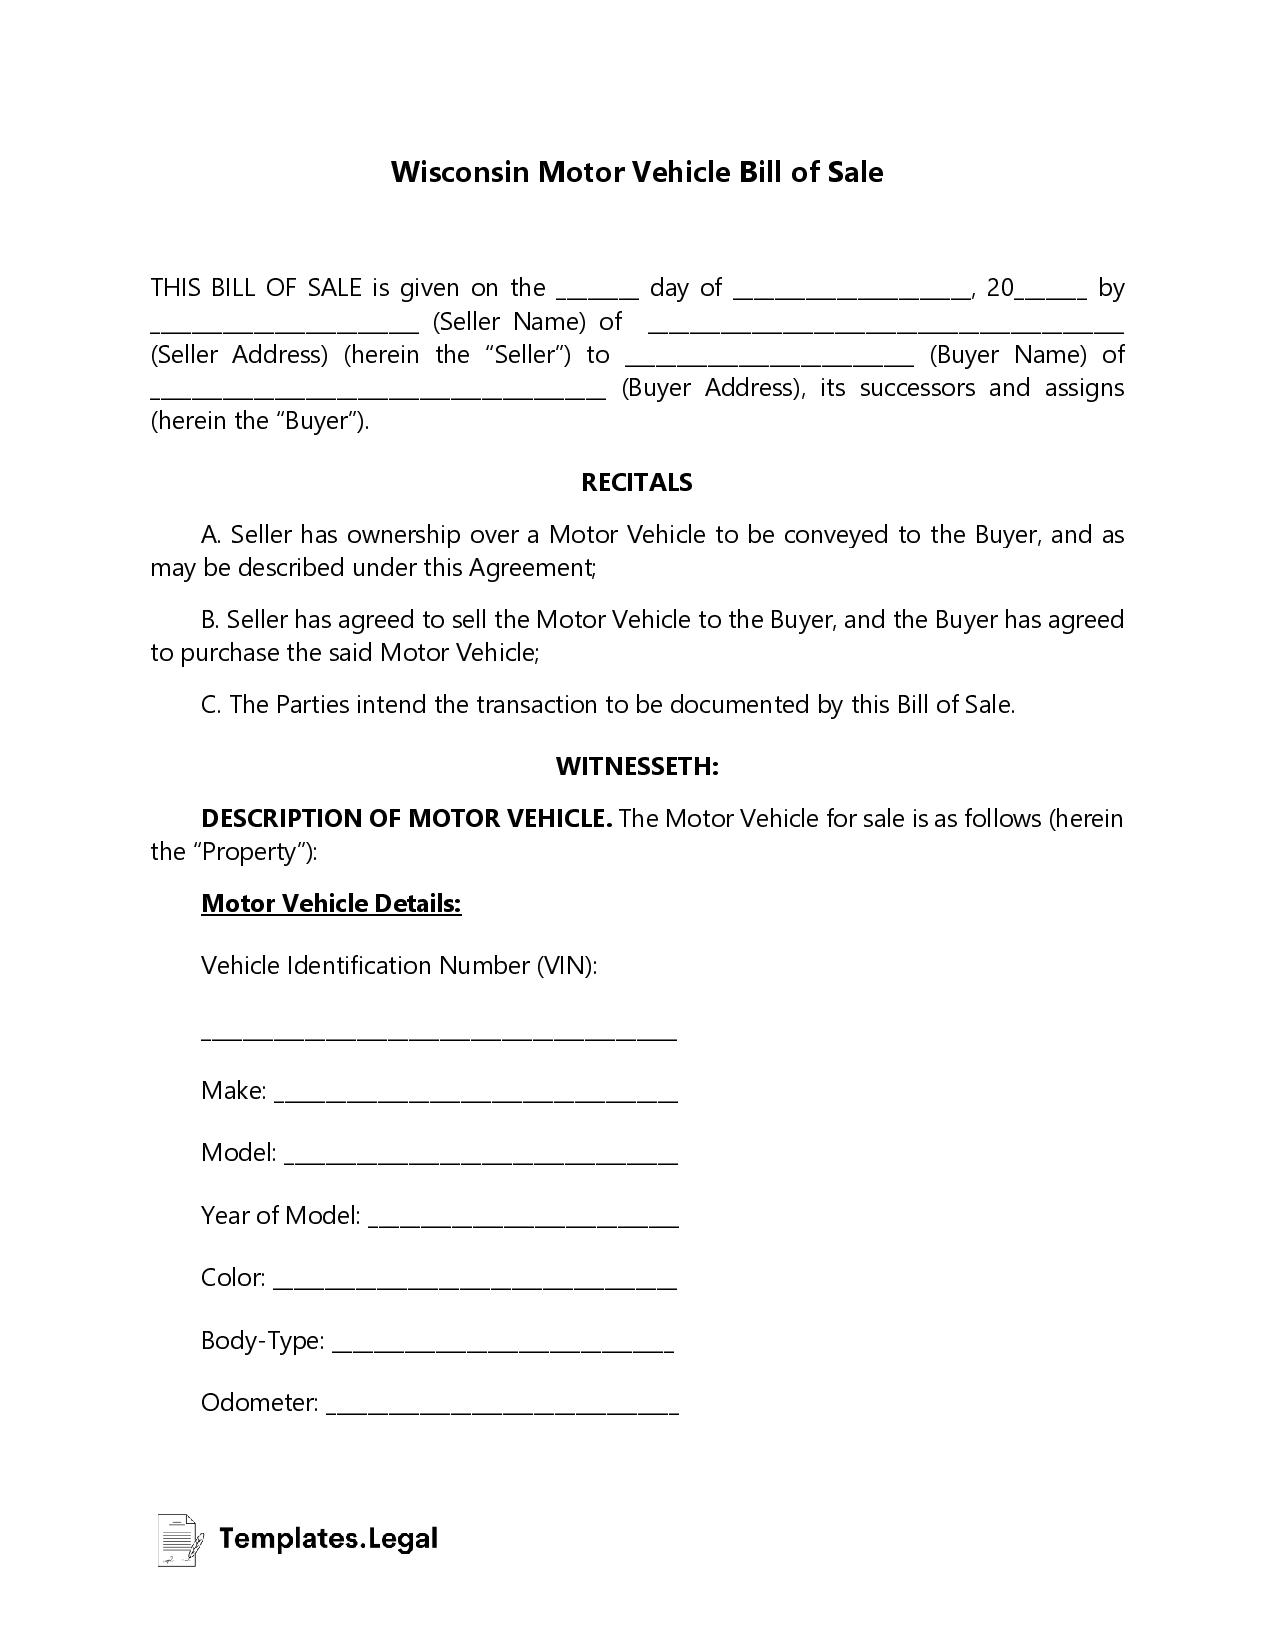 Wisconsin Motor Vehicle Bill of Sale - Templates.Legal